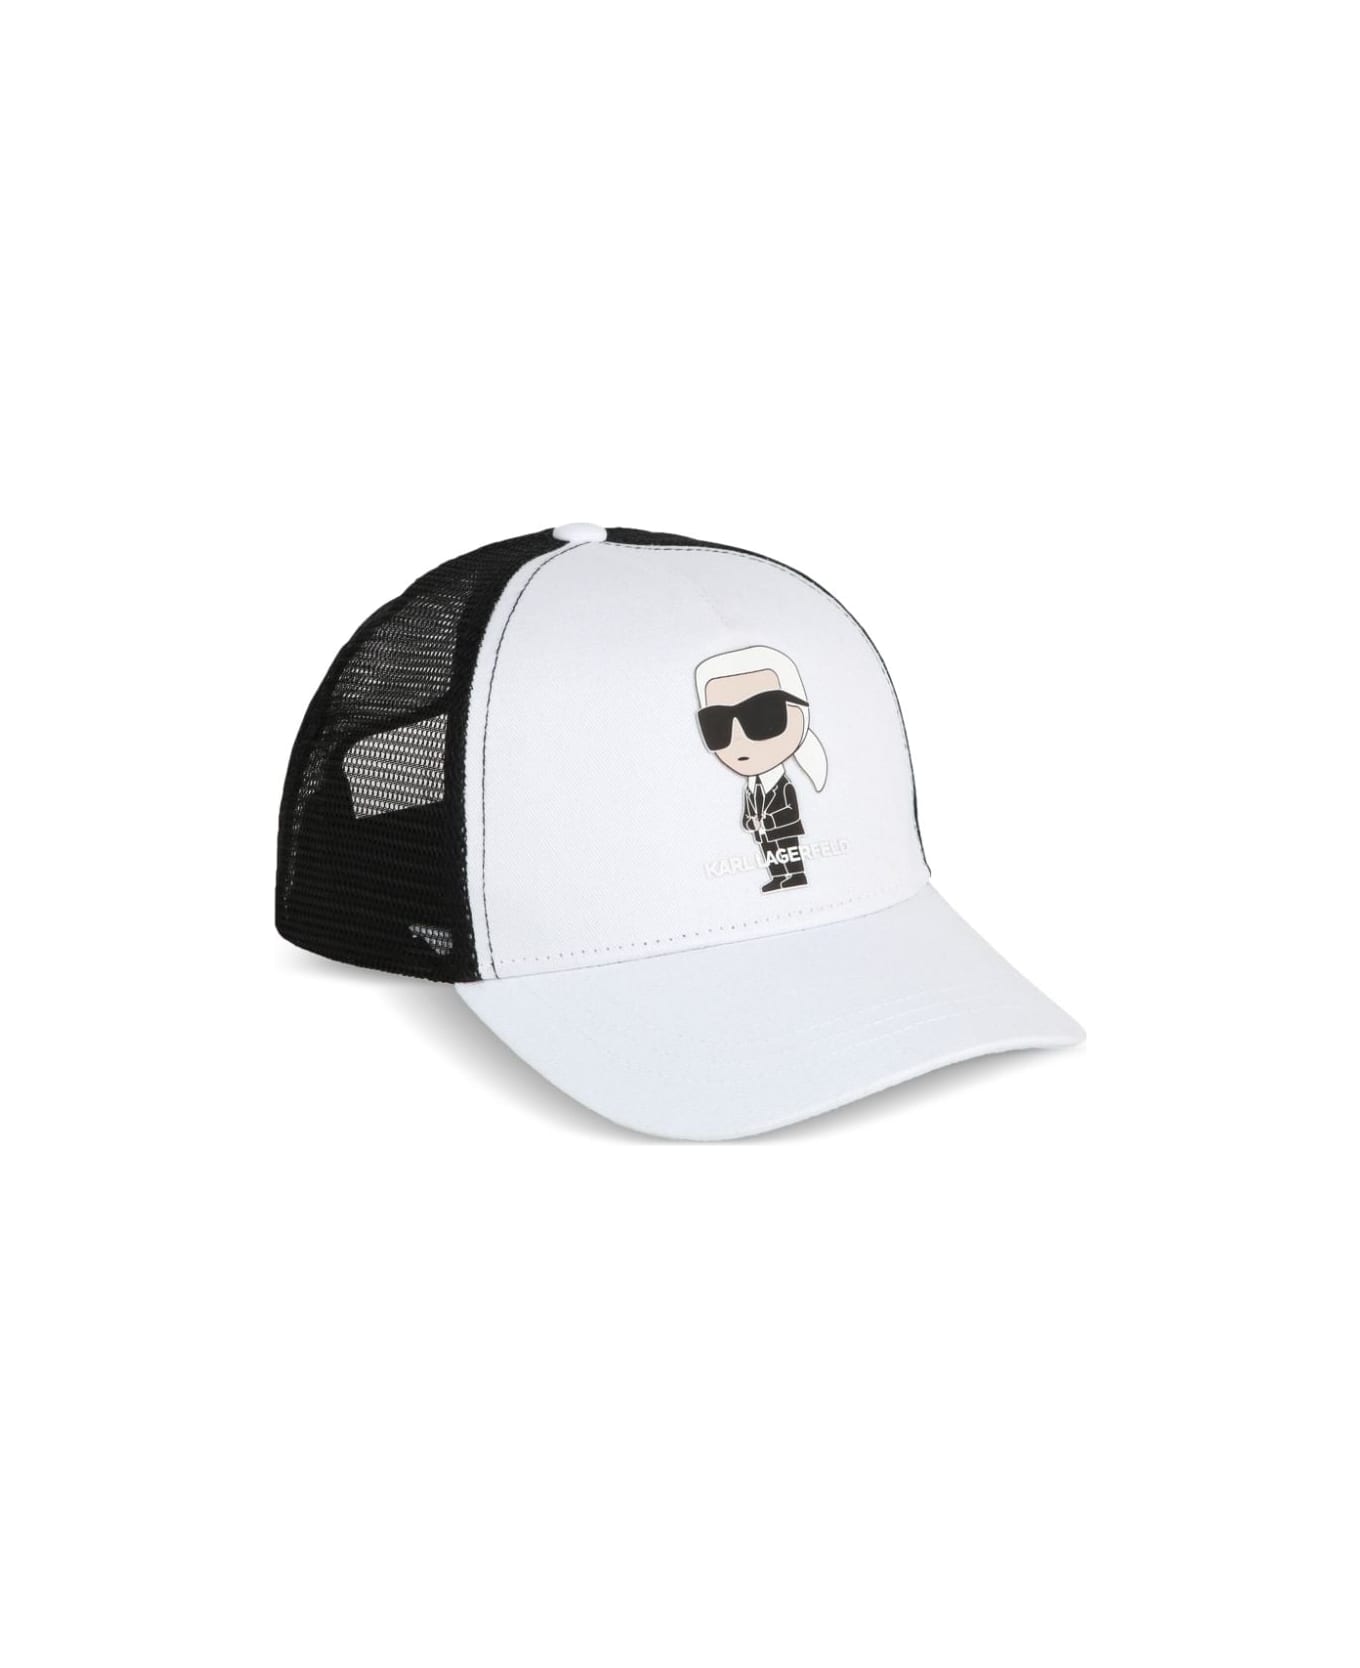 Karl Lagerfeld Kids Cappello Con Stampa - White アクセサリー＆ギフト